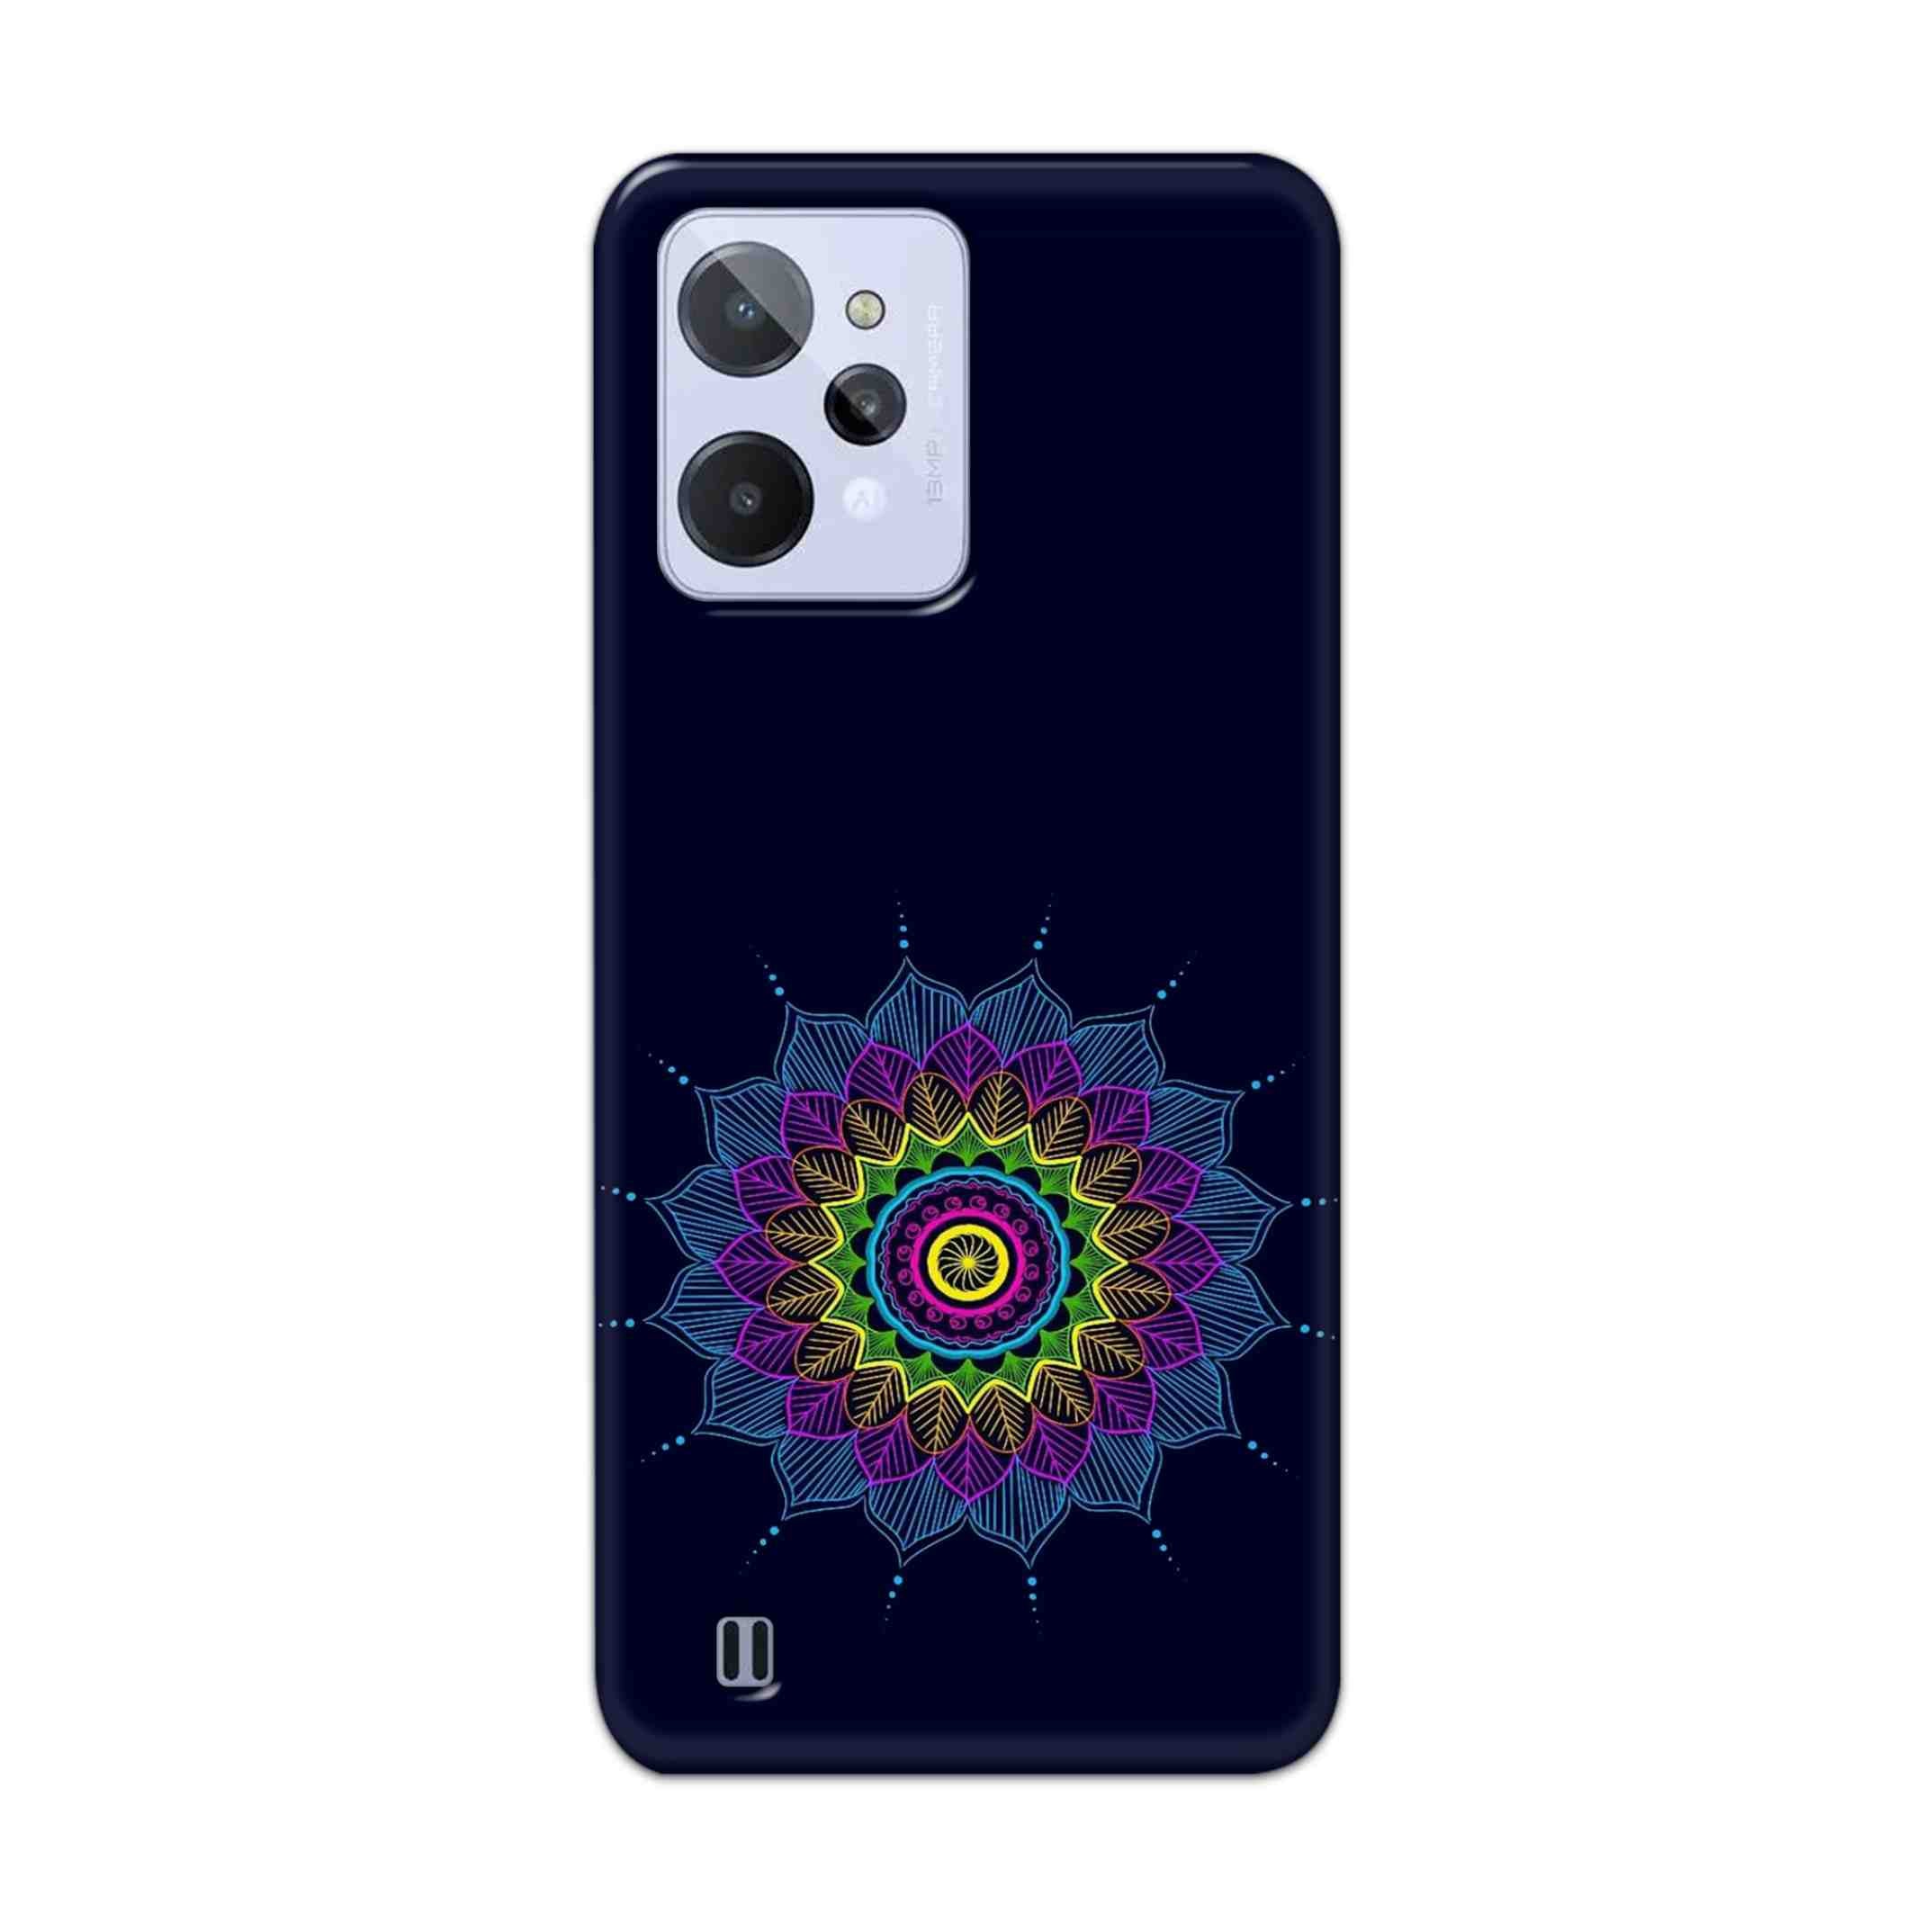 Buy Jung And Mandalas Hard Back Mobile Phone Case Cover For Realme C31 Online